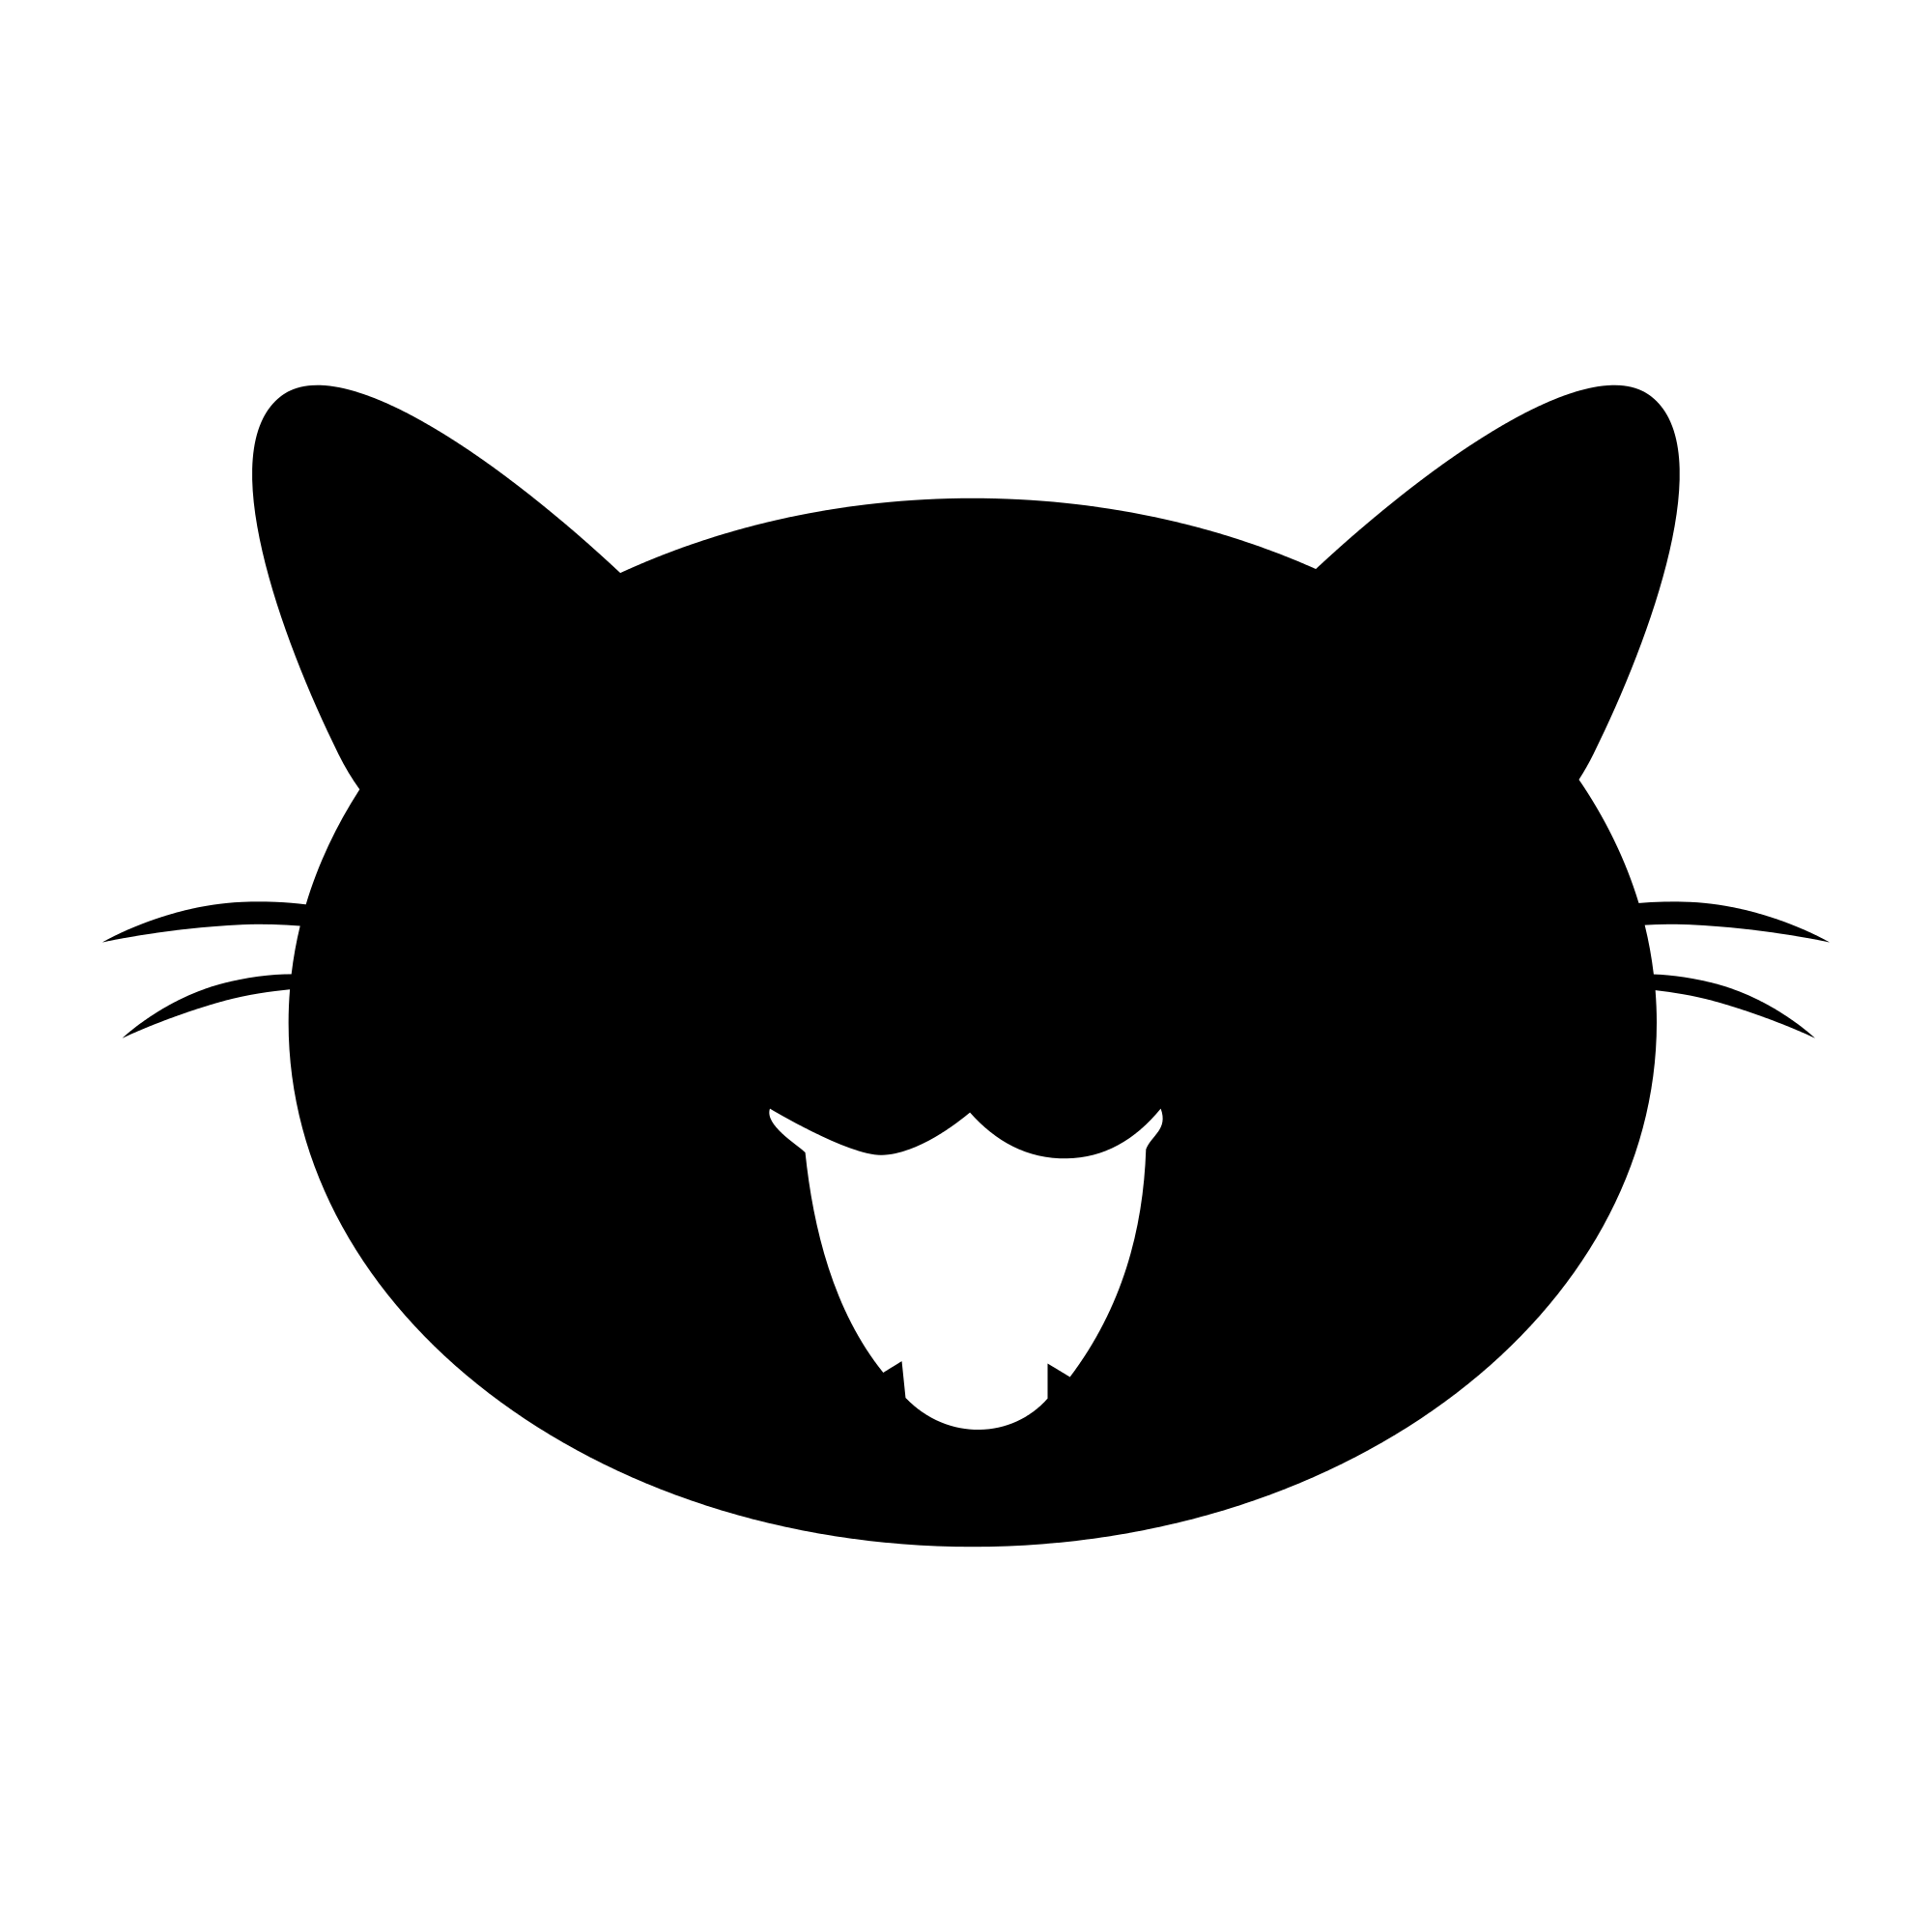 Black and White Cat Head Logo - Cat head outline image free library - RR collections